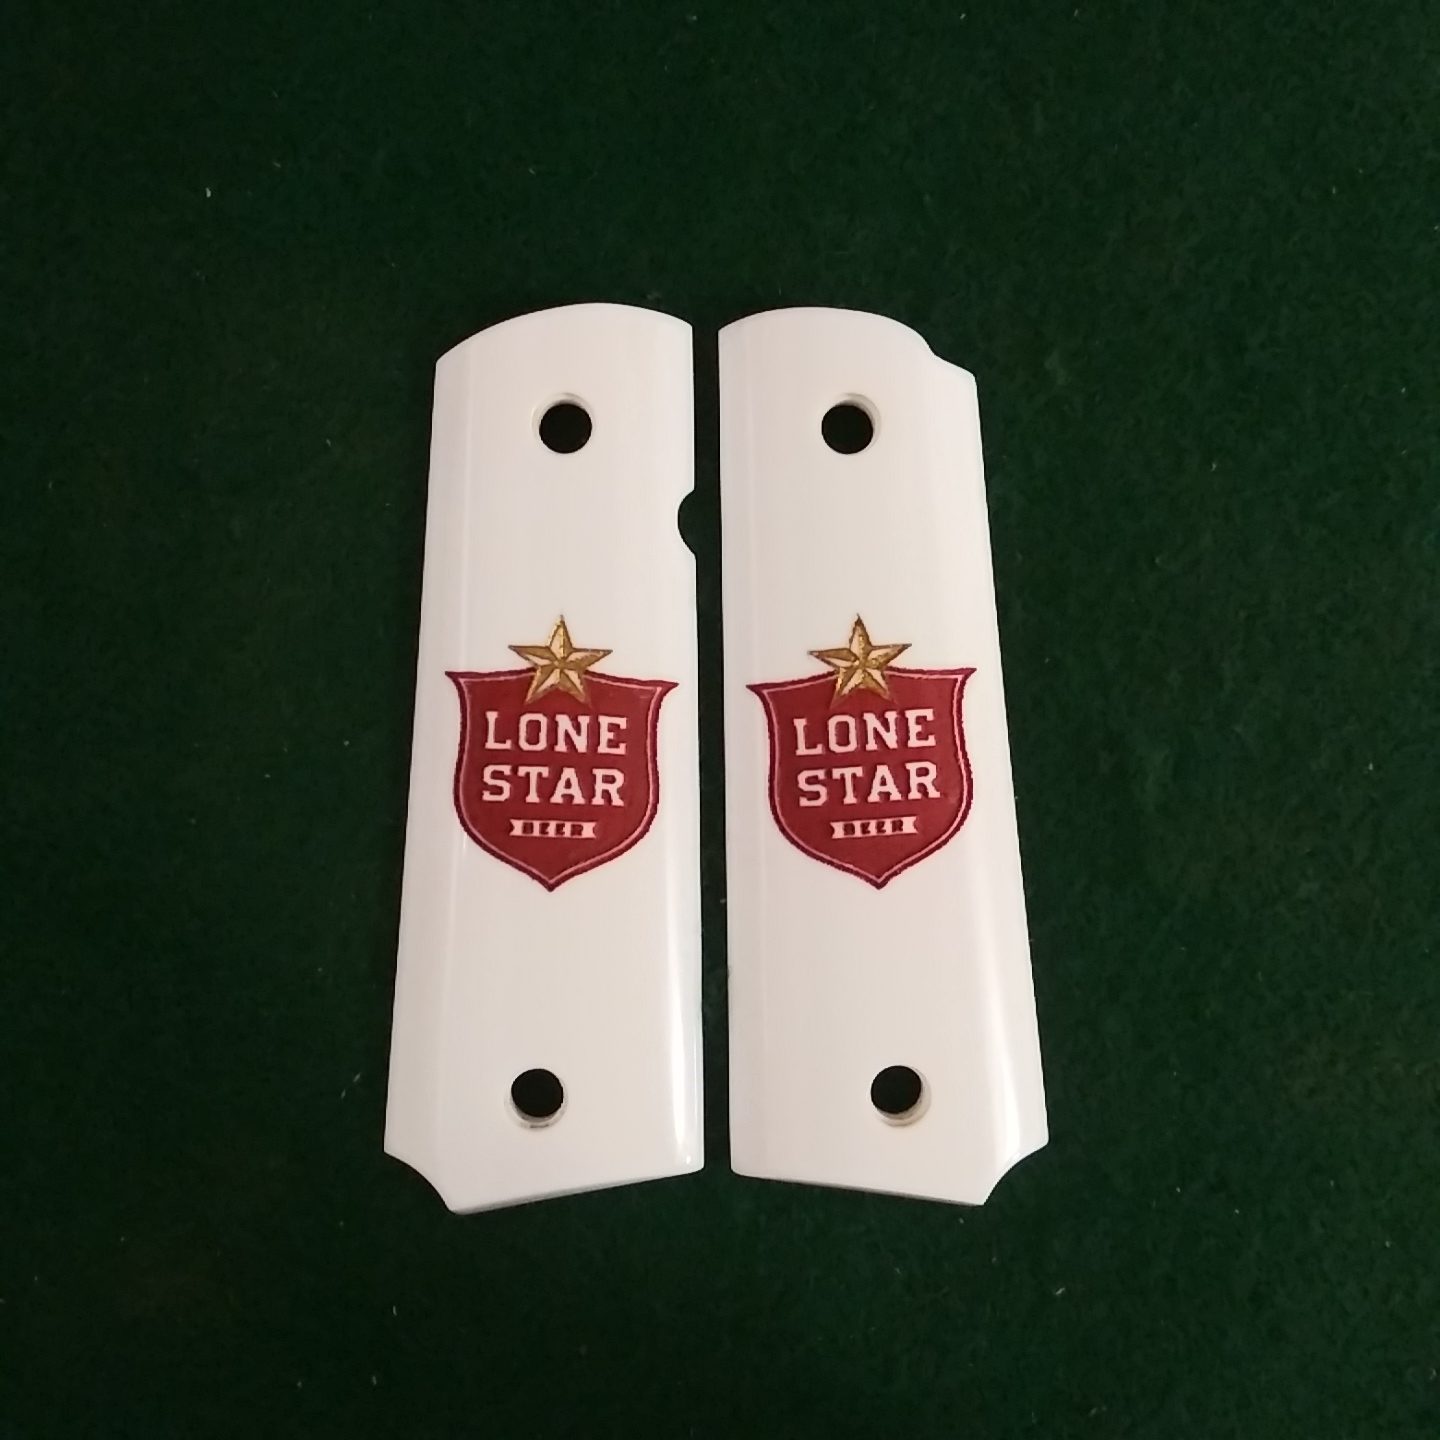 https://texasgrips.com/wp-content/uploads/2021/10/1911-Lone-Star-Beer-grips-rotated.jpg